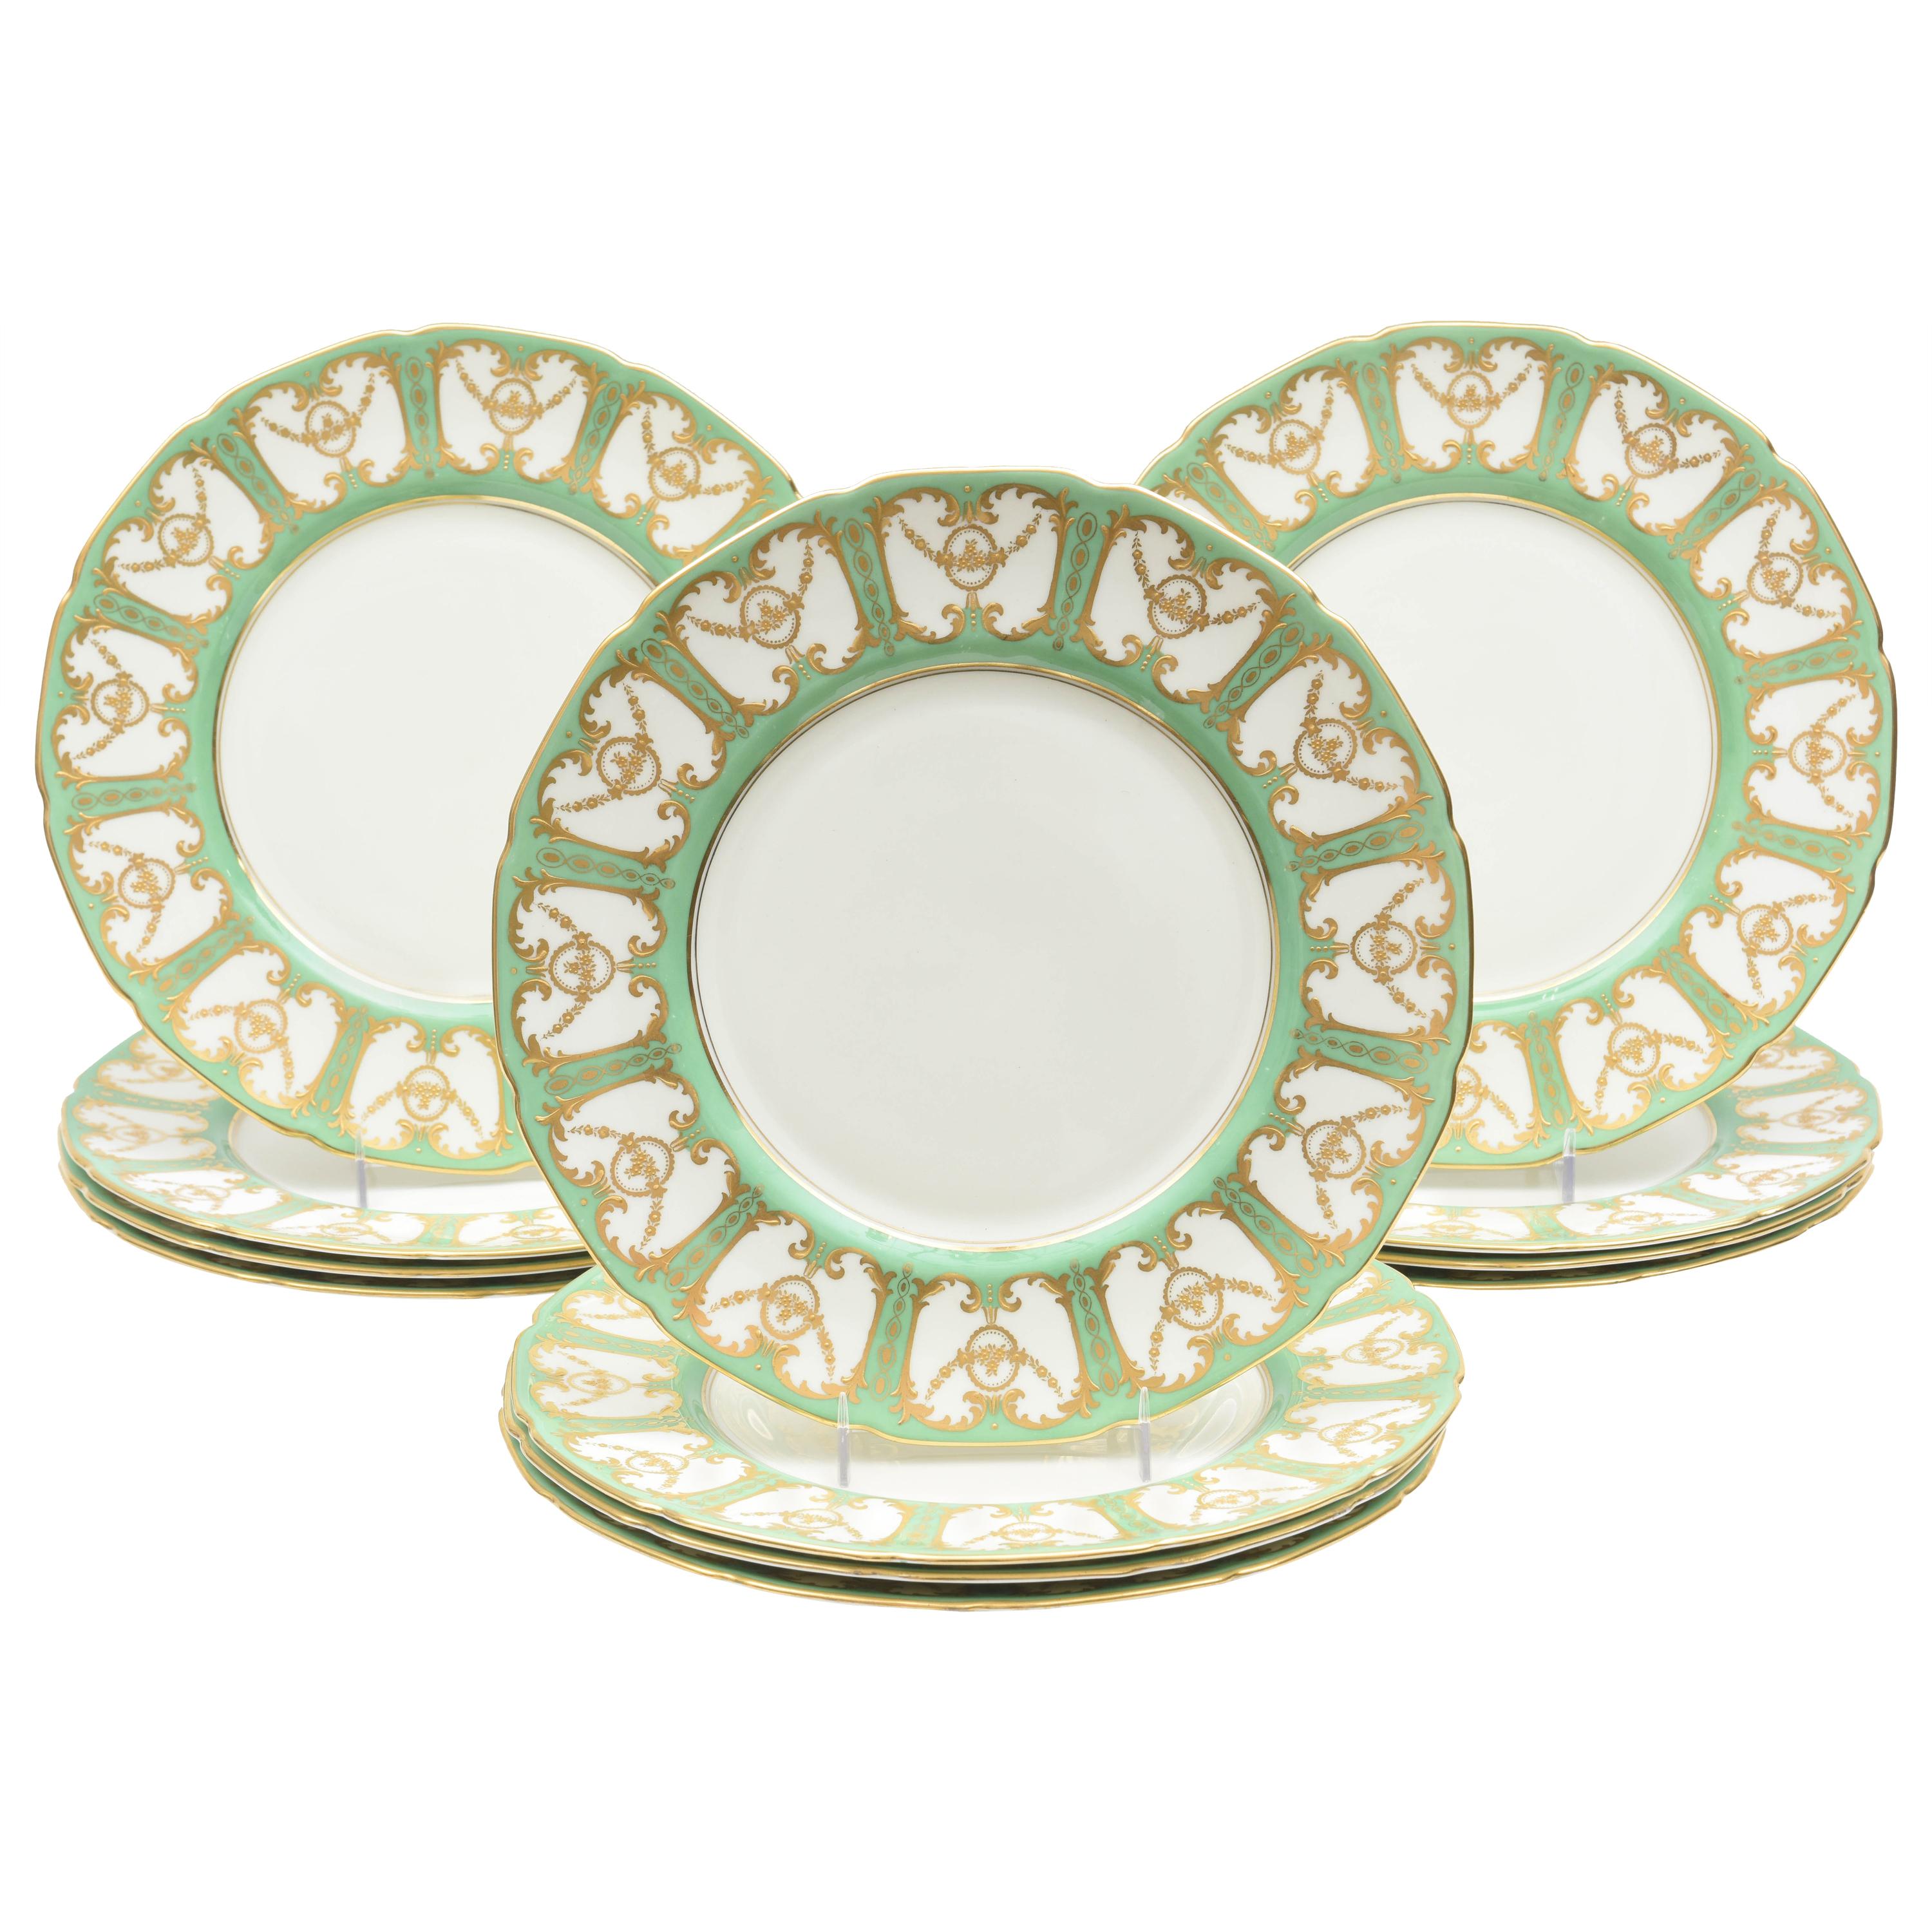 12 Royal Doulton "Sevres" Green and Gilt Encrusted Dinner Plates. Antique China